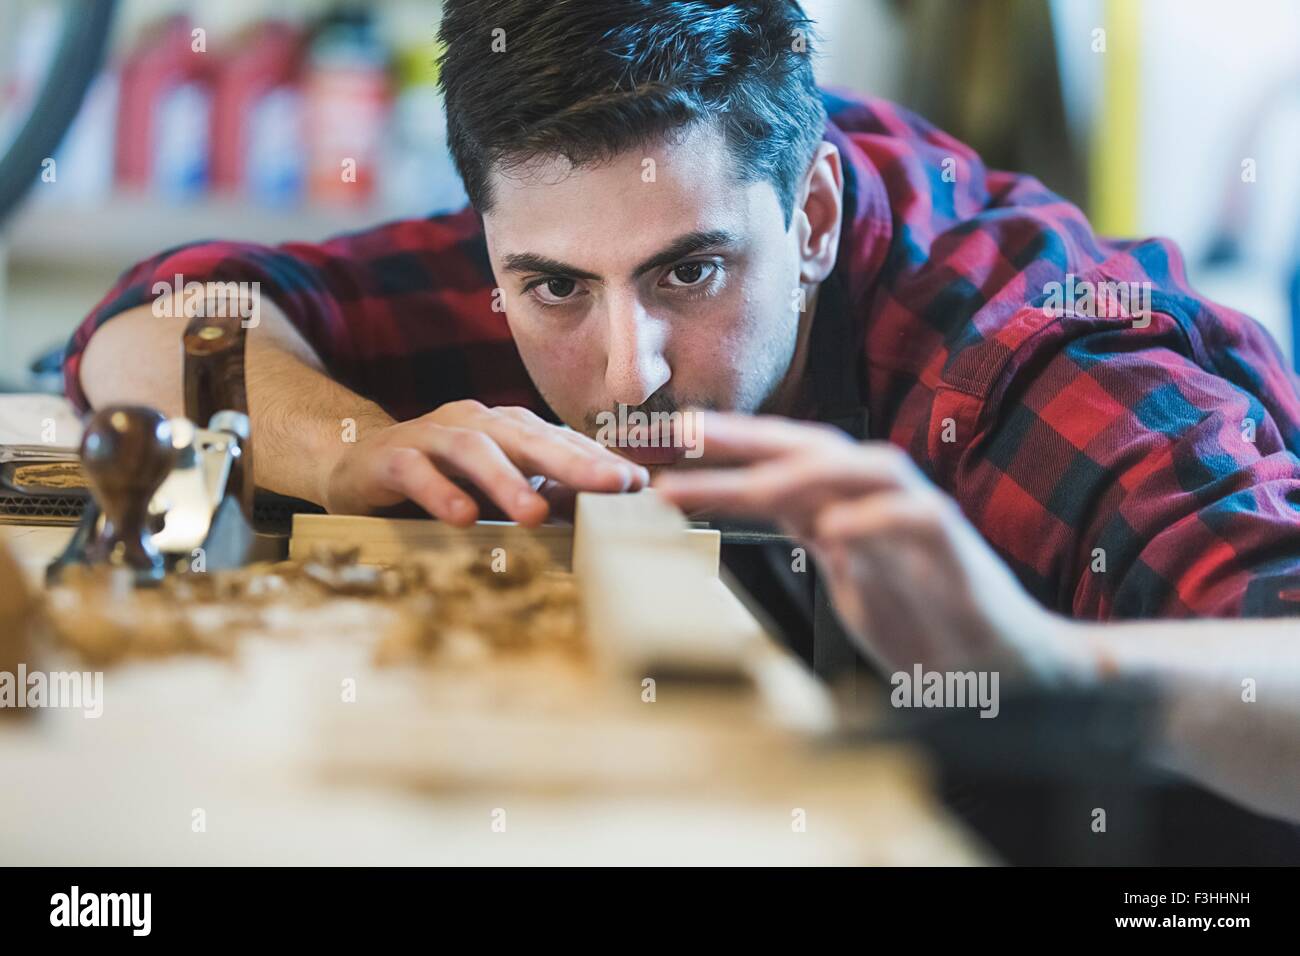 Young man using wood plane to smooth wood object Stock Photo